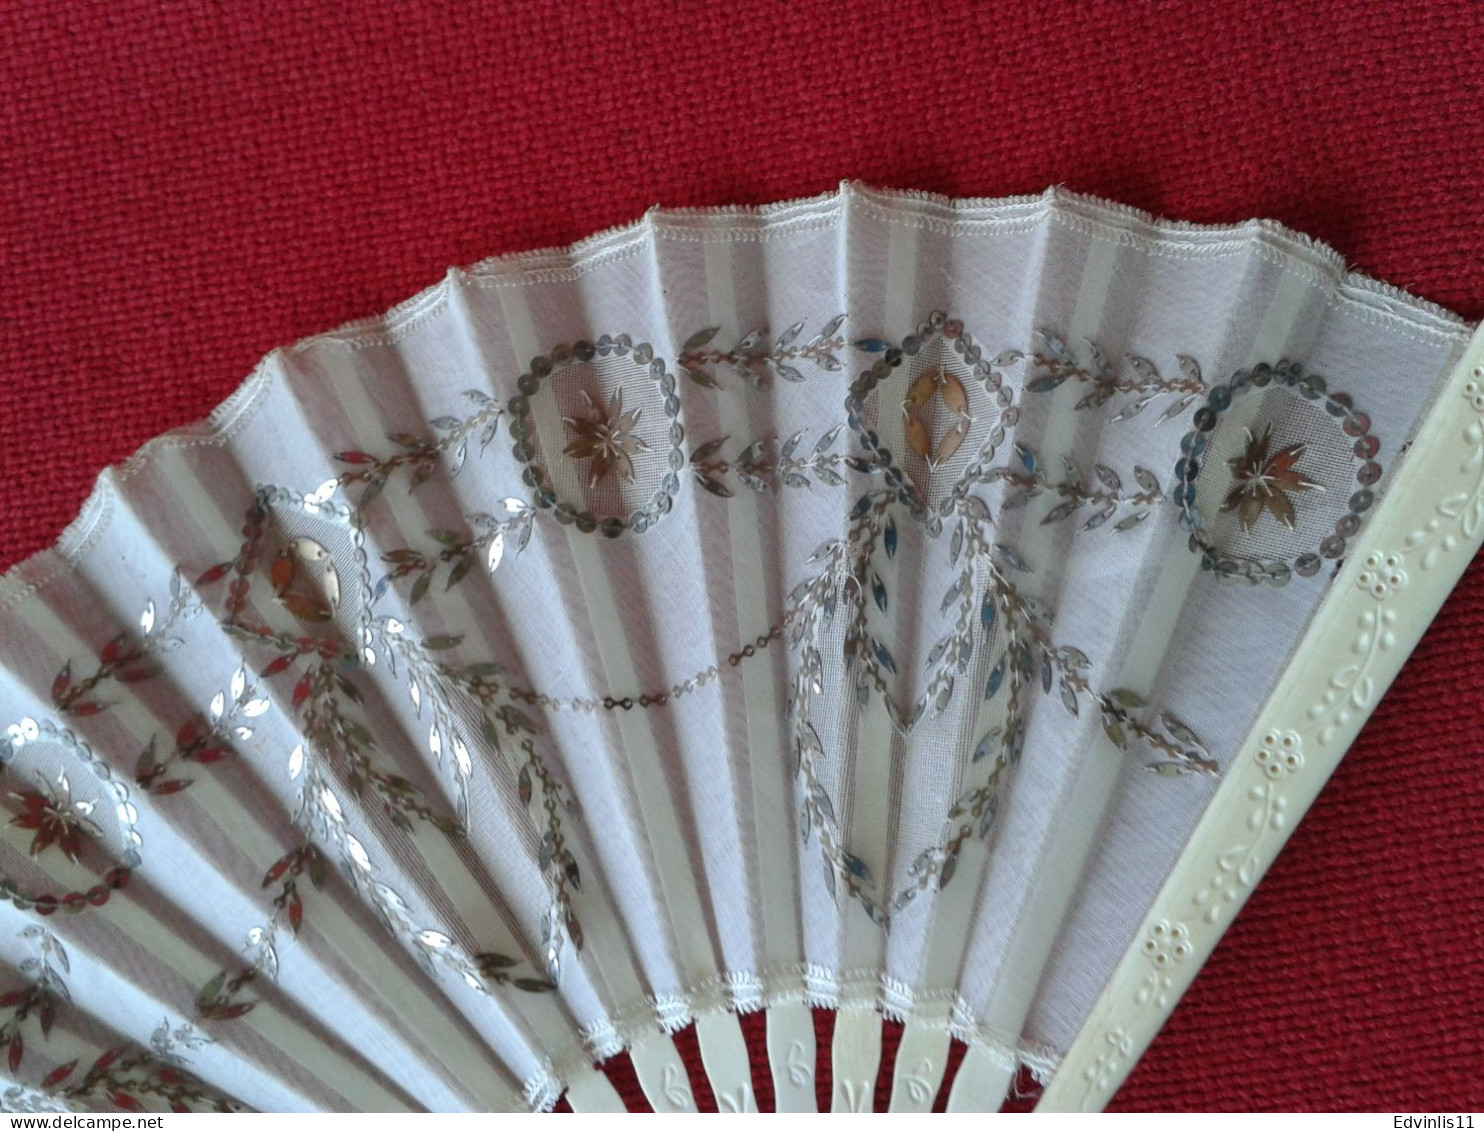 Antique! Victorian Style HAND FAN With Silver Sequin & White Lace Beautiful Bone Spokes - Fächer